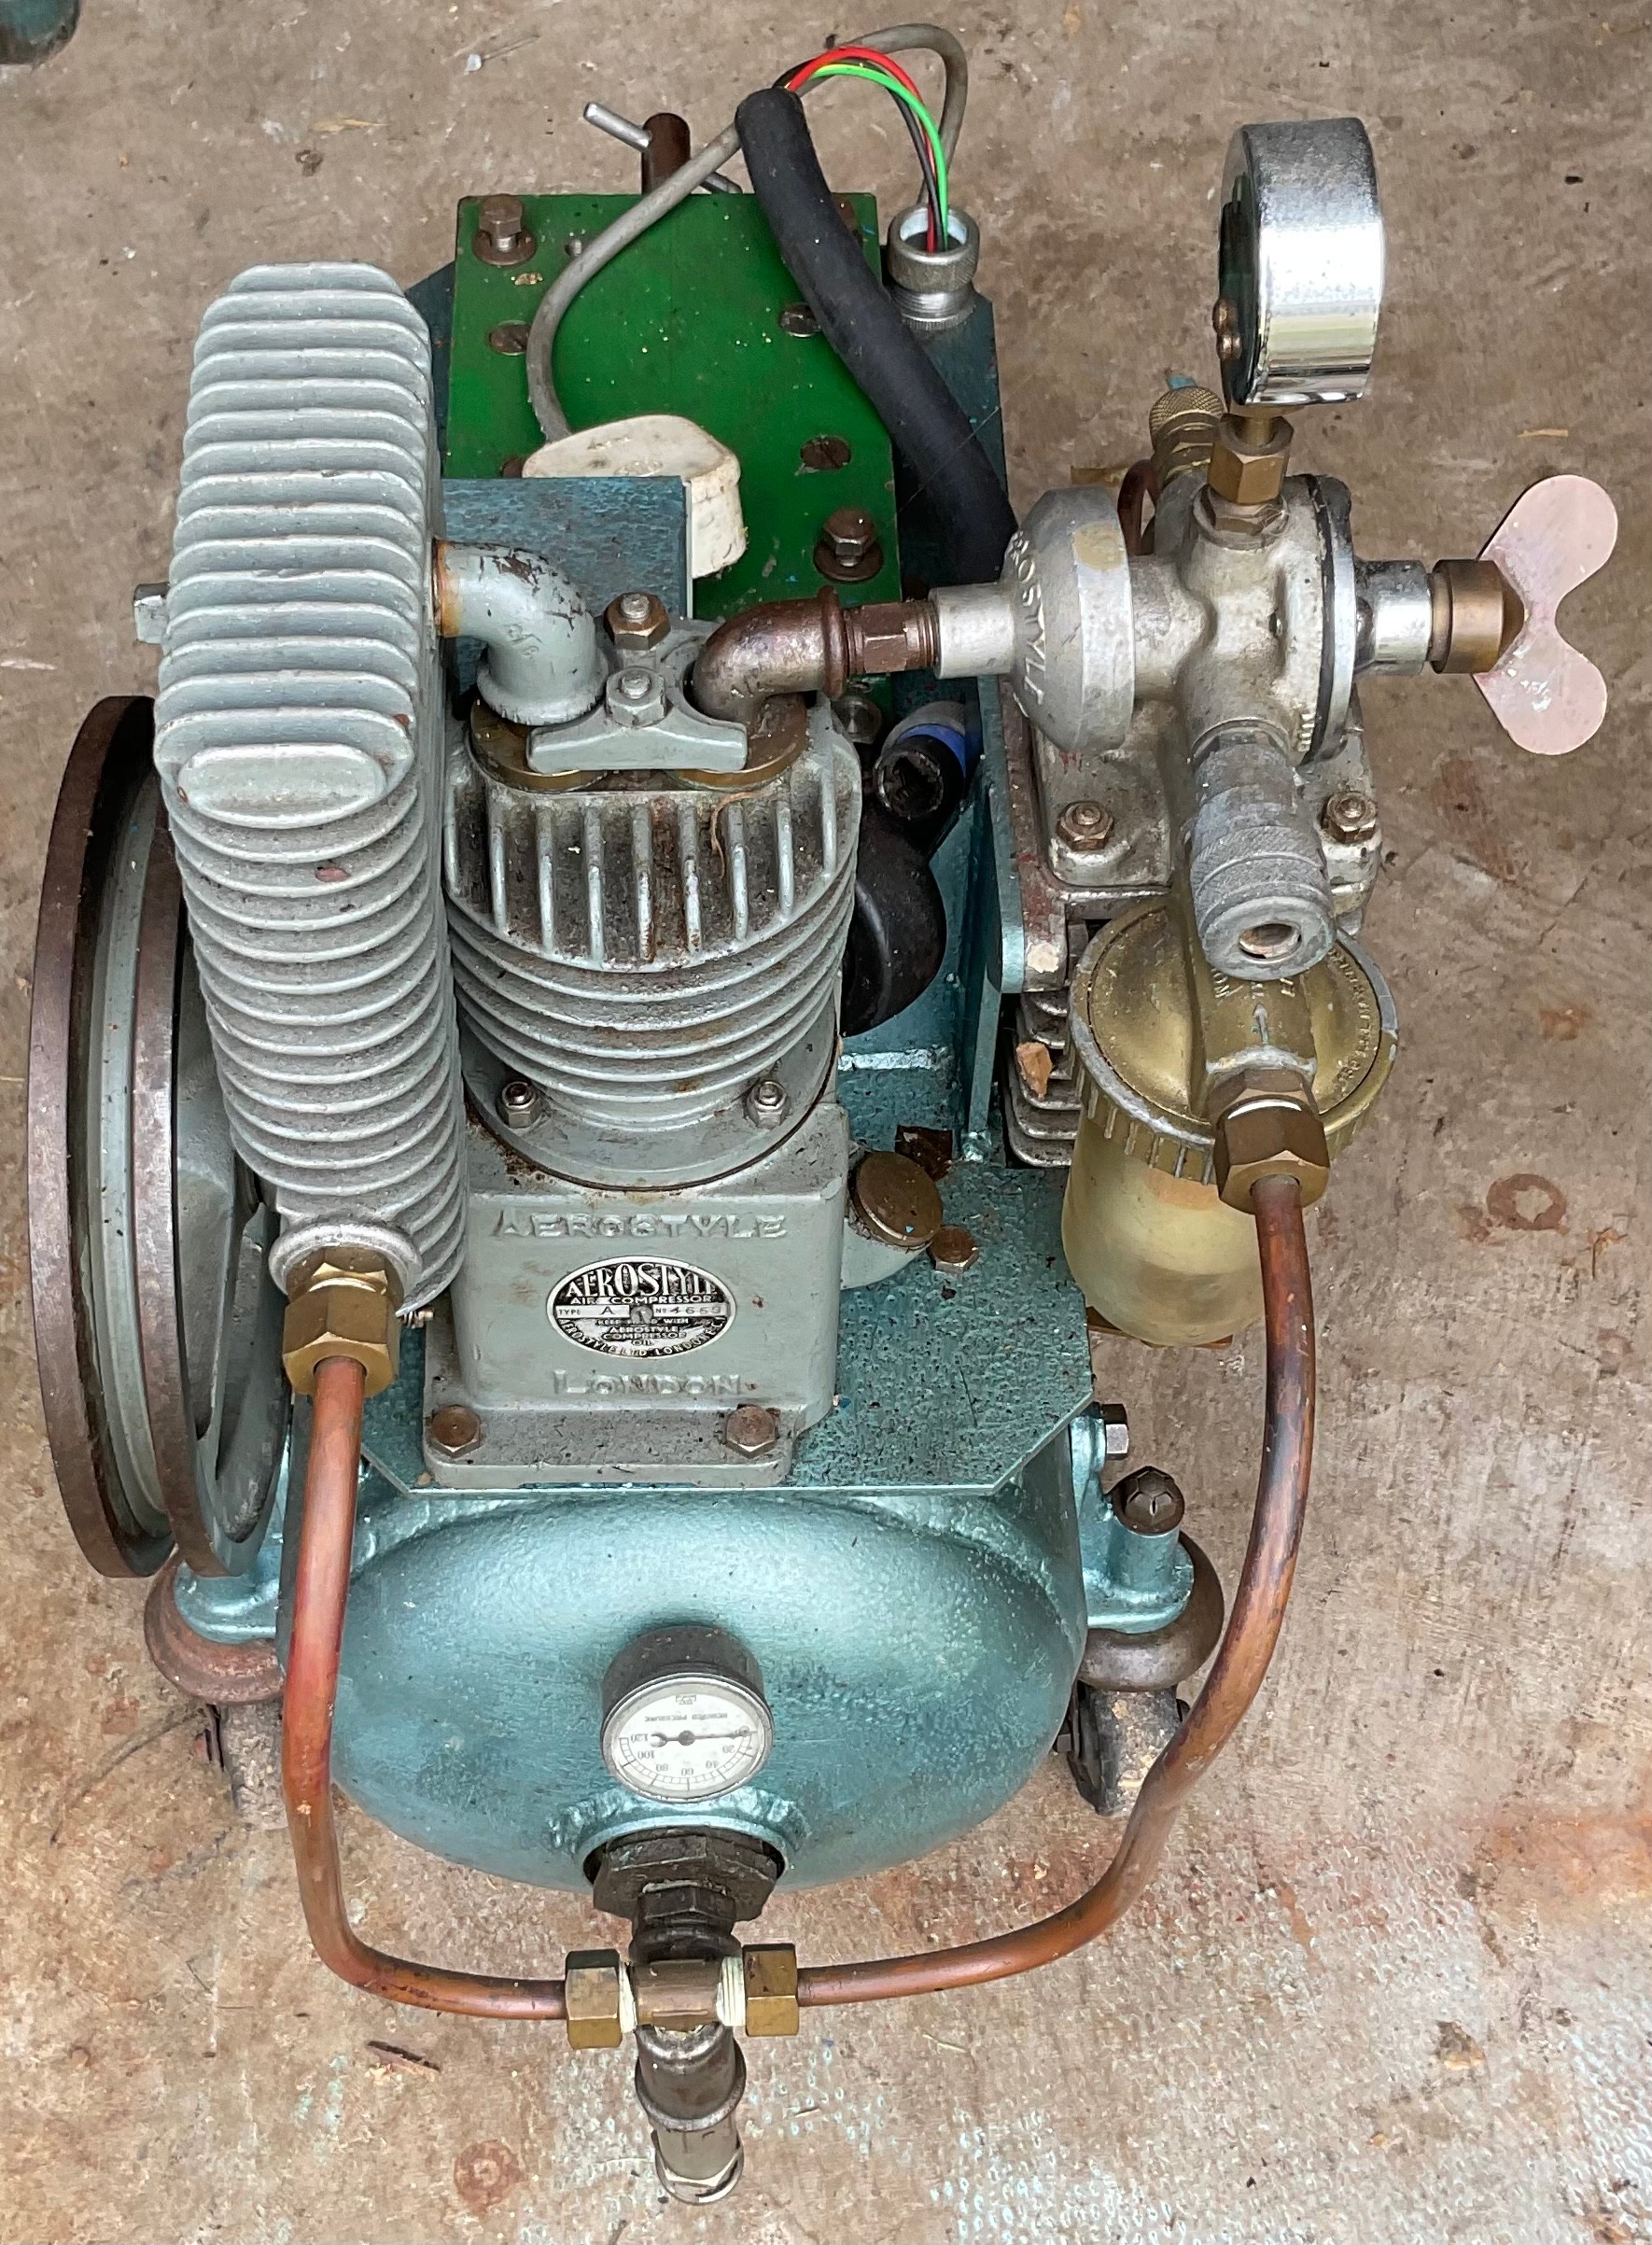 Tools - an air compressor, Aerostyle Ltd., London ***Please note that this lot is held offsite and